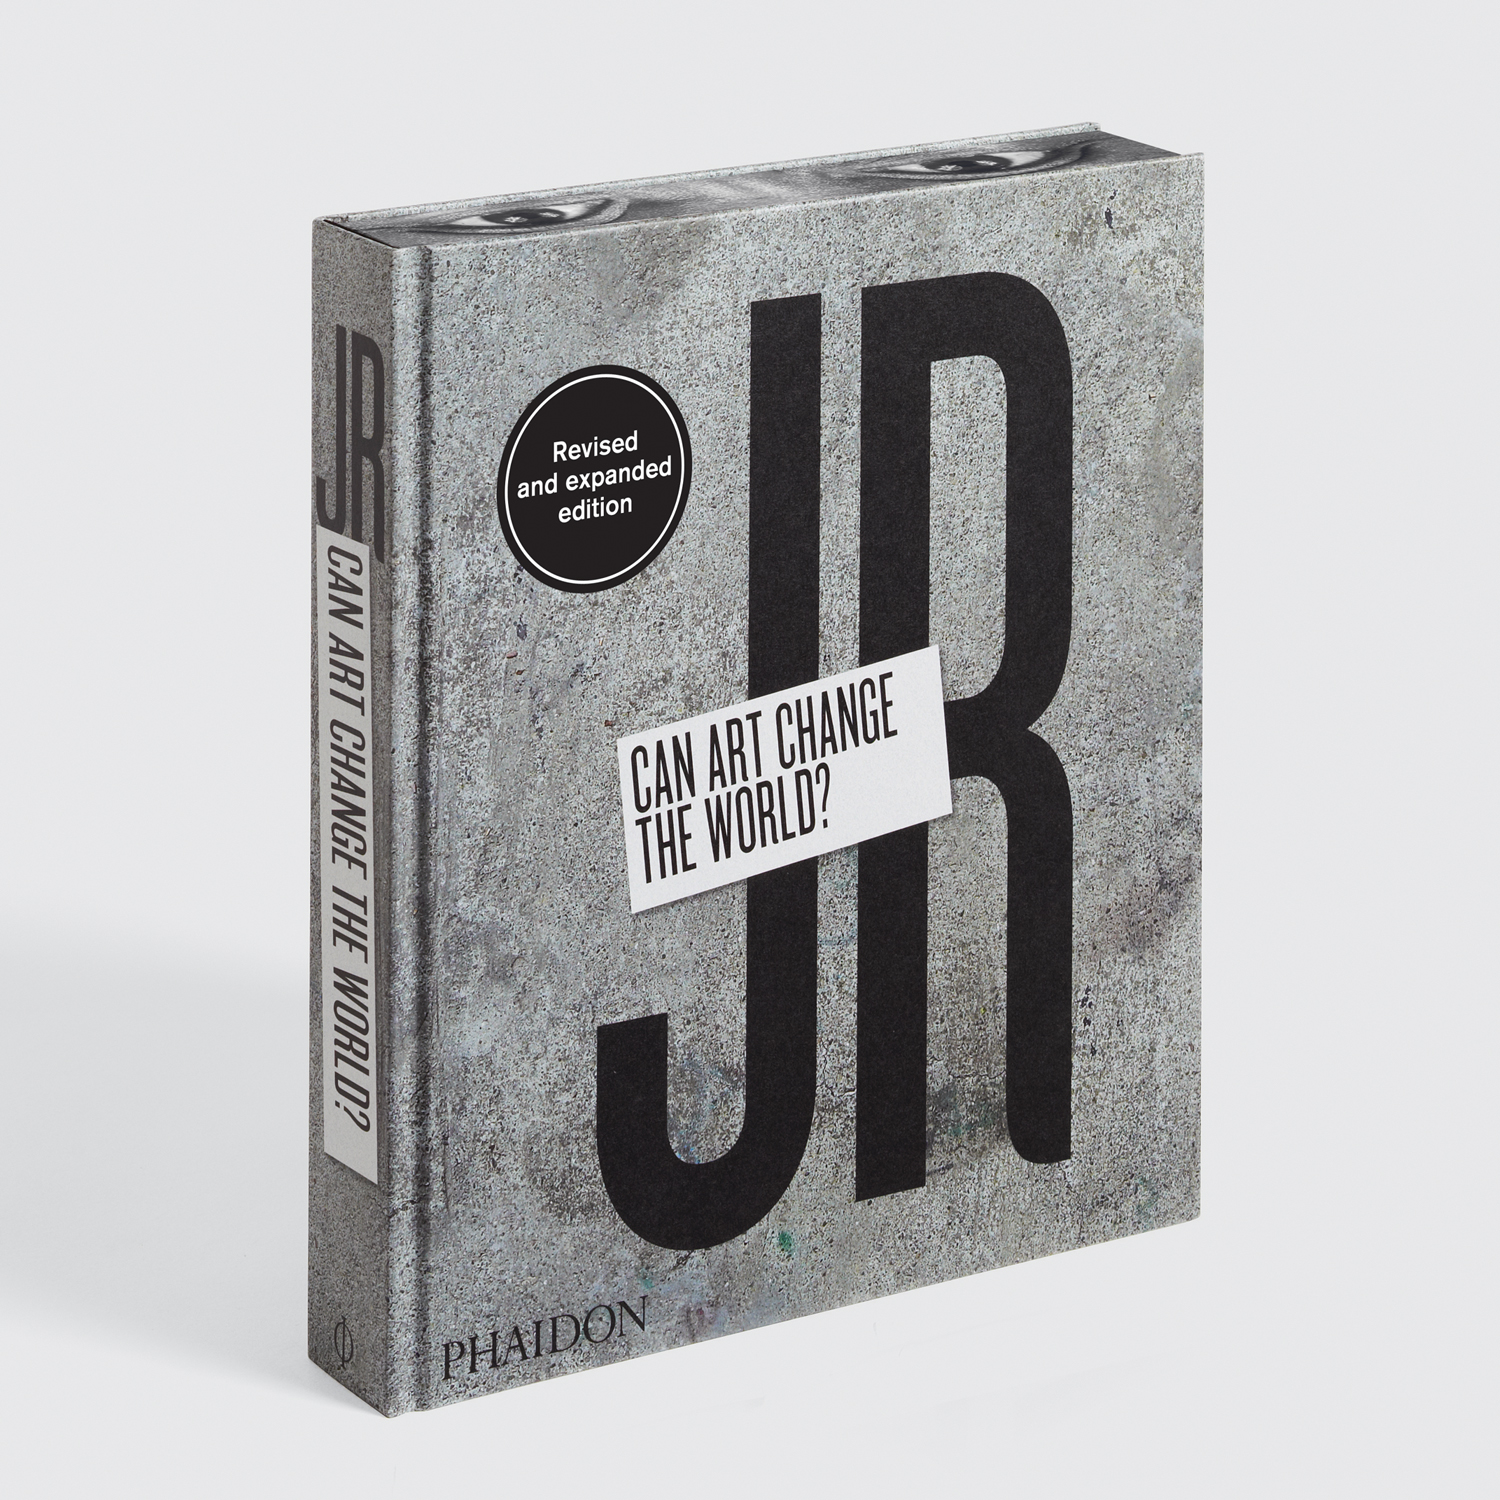 All you need to know about JR: Can Art Change the World? (Revised and Expanded Edition)